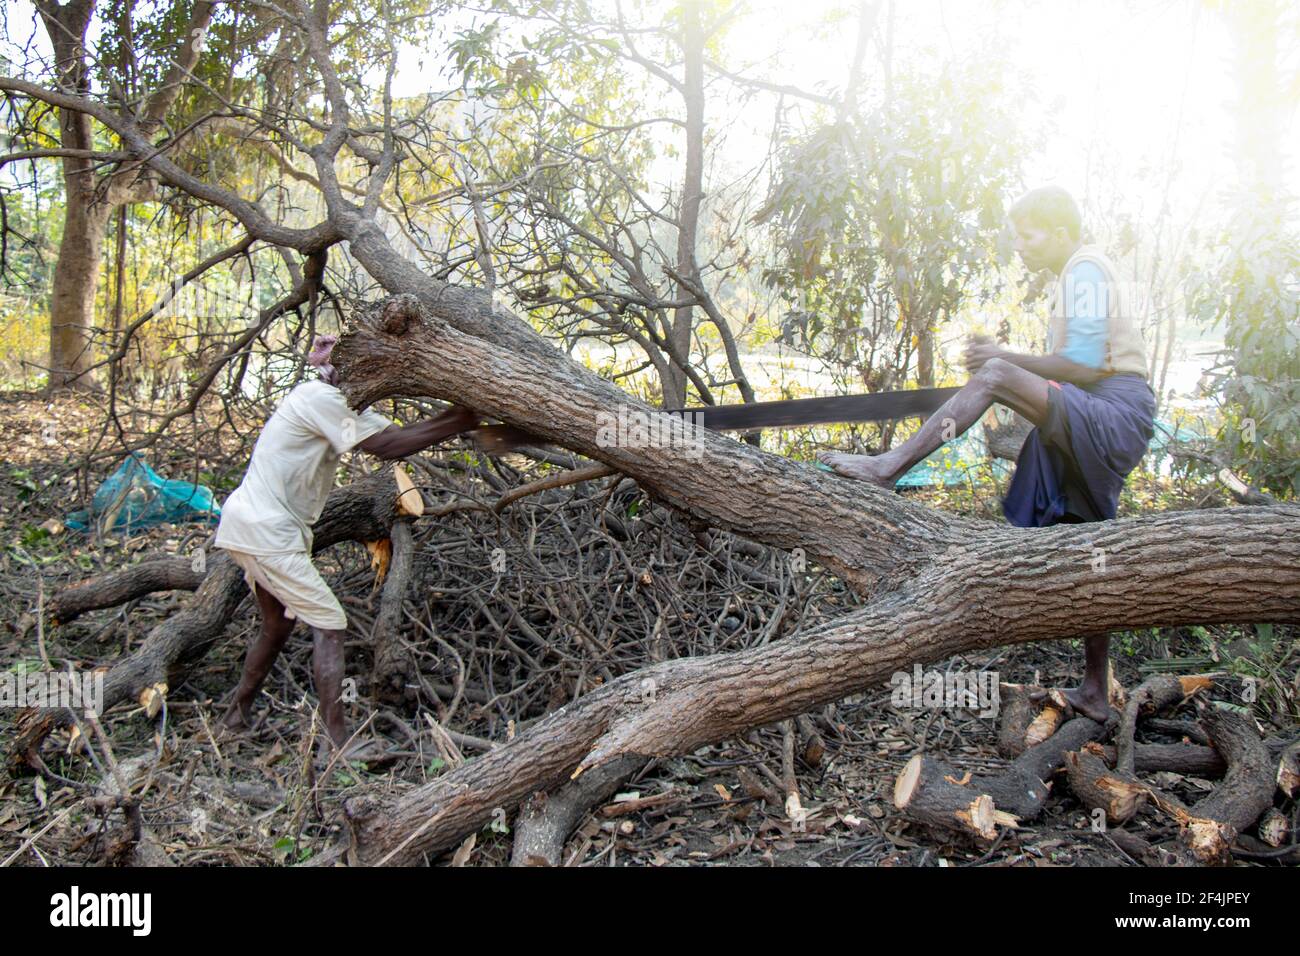 labors cutting the trees sawing chain saw in motion, bring down trees concept Begusarai, Bihar, India, 20-01-2021 Stock Photo